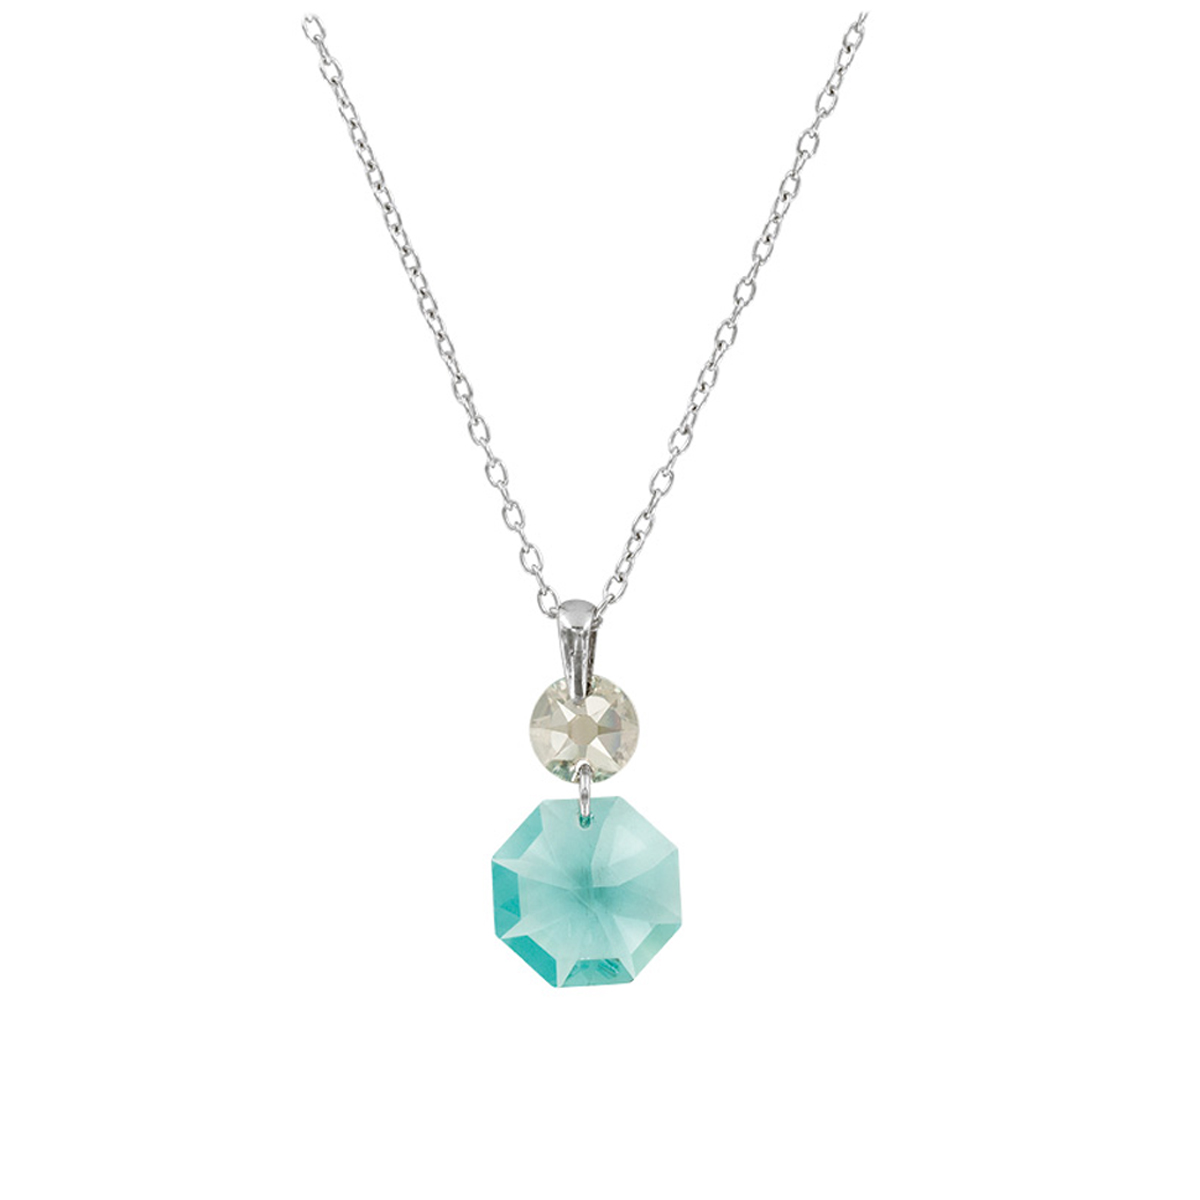 Collier Argent artisanal \'Sissi\' turquoise blanc (Crystal) - 23x14 mm - [Q6010]